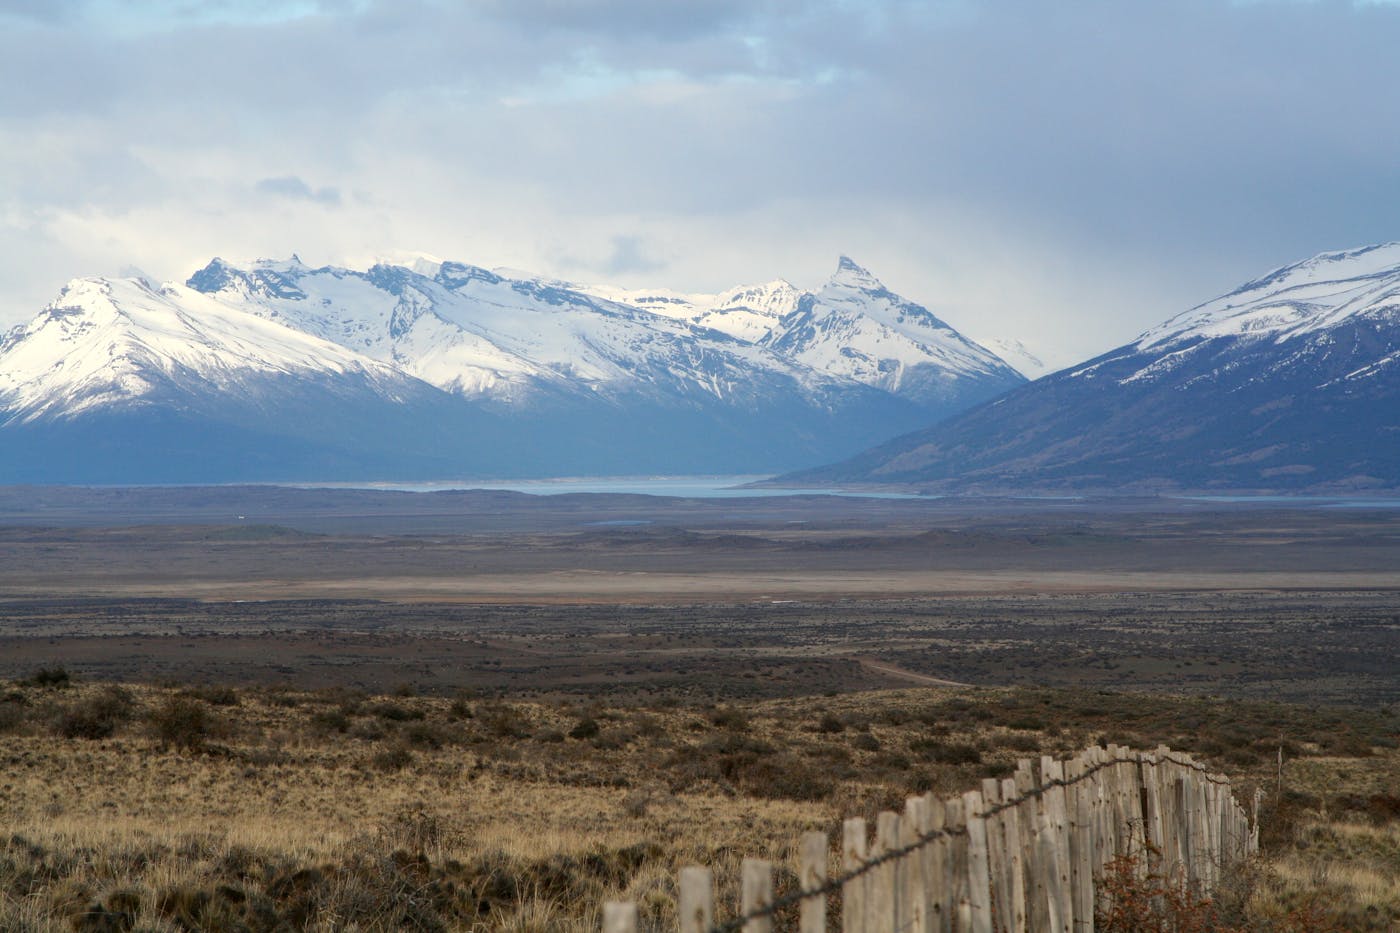 Patagonia Steppe & Low Mountains (NT2)